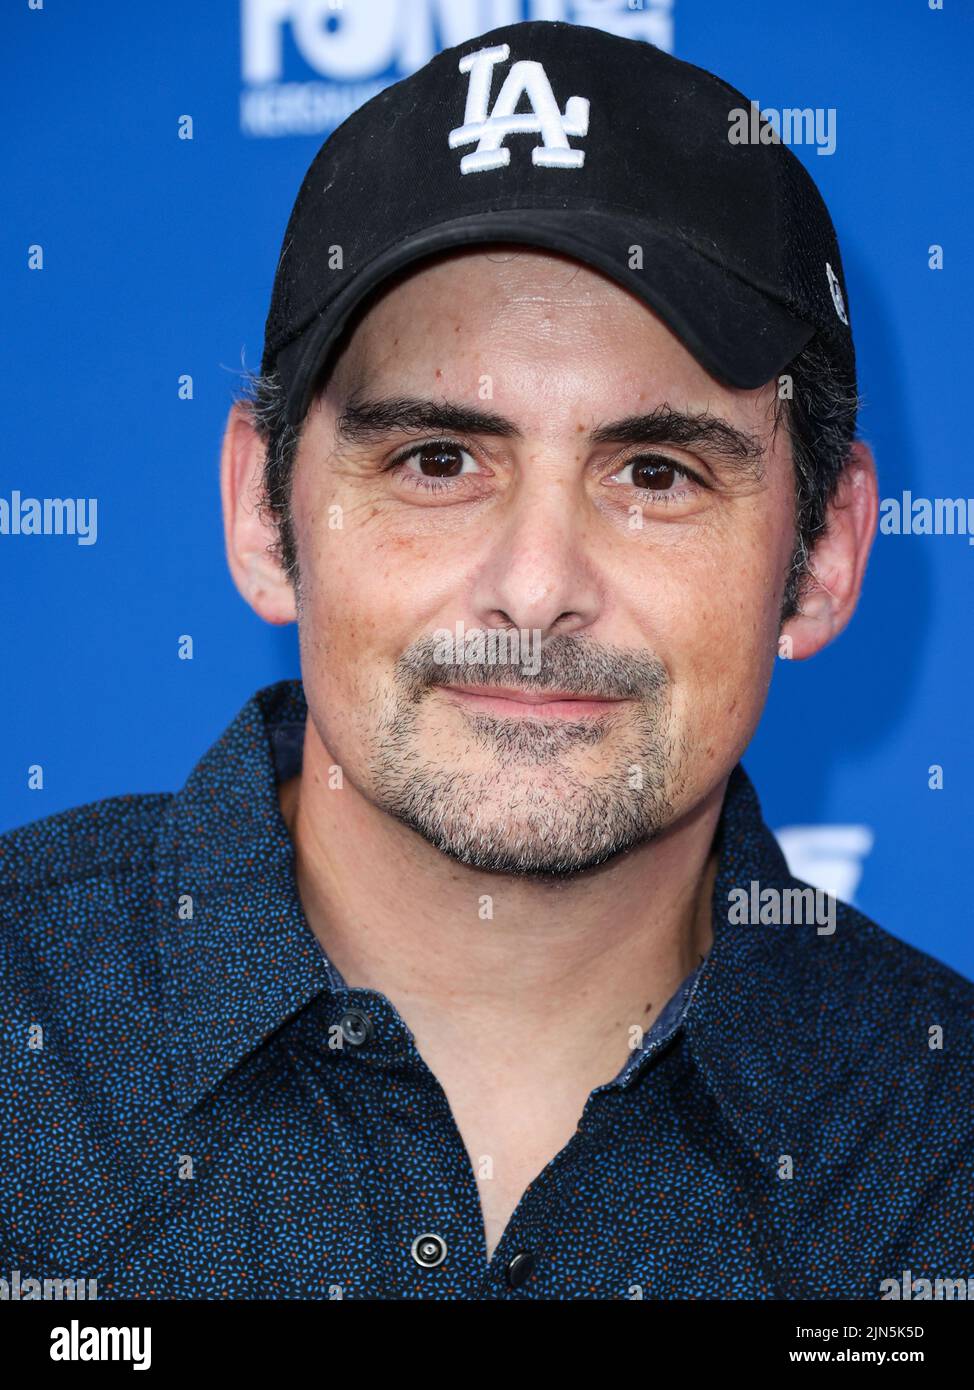 ELYSIAN PARK, LOS ANGELES, CALIFORNIA, USA - AUGUST 08: American singer-songwriter Brad Paisley arrives at Kershaw's Challenge Ping Pong 4 Purpose 2022 held at Dodger Stadium on August 8, 2022 in Elysian Park, Los Angeles, California, United States. (Photo by Xavier Collin/Image Press Agency) Stock Photo